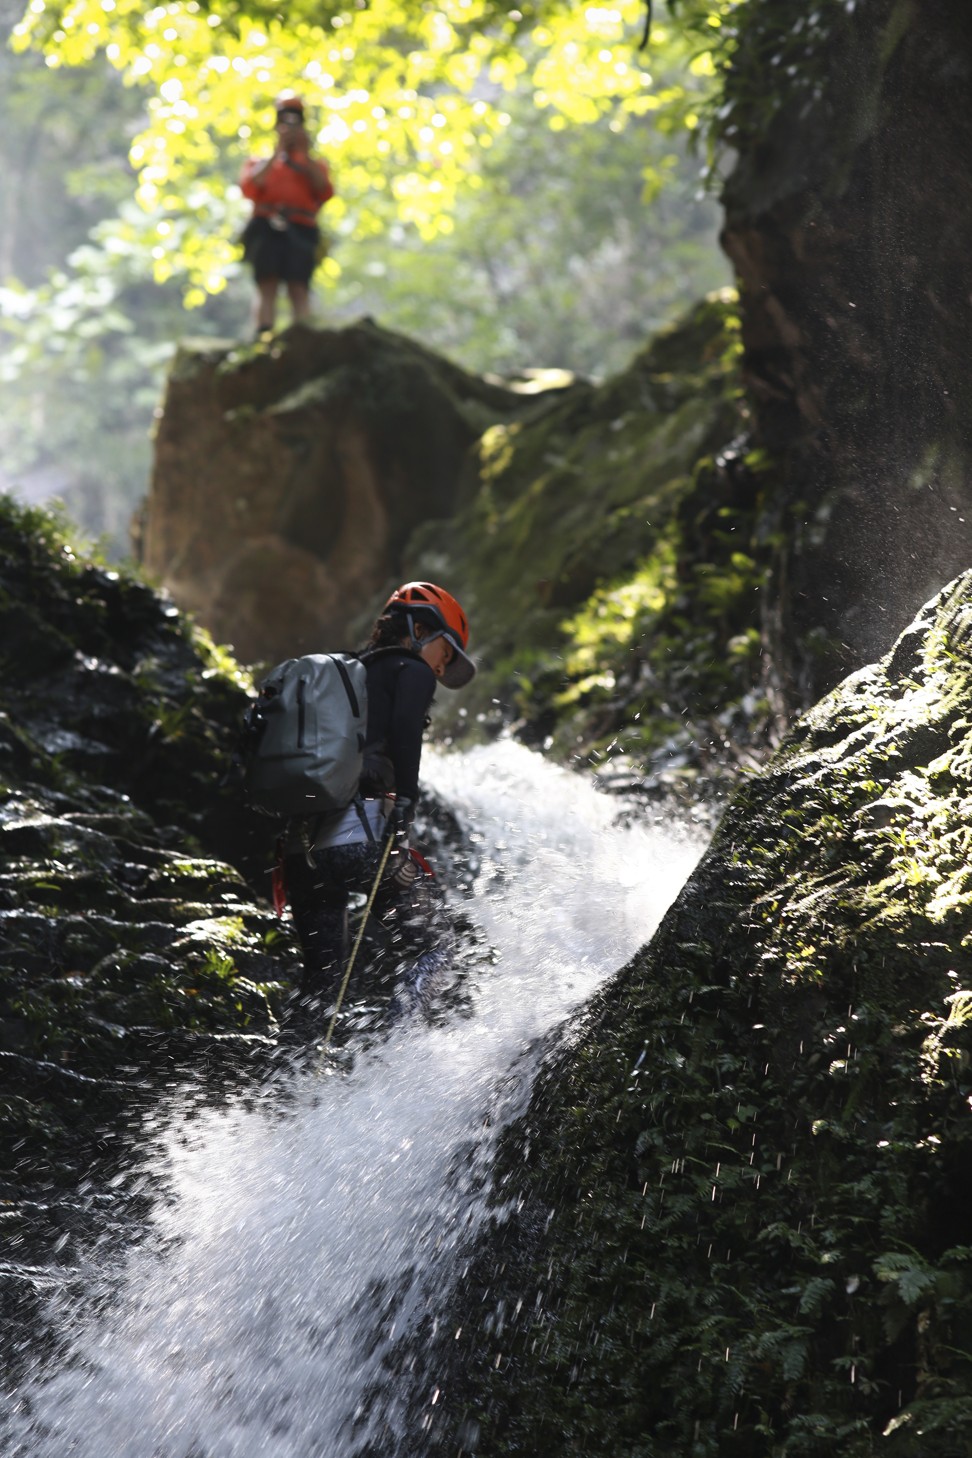 Huot abseils down a waterfall in the New Territories. Photo: James Wendlinger